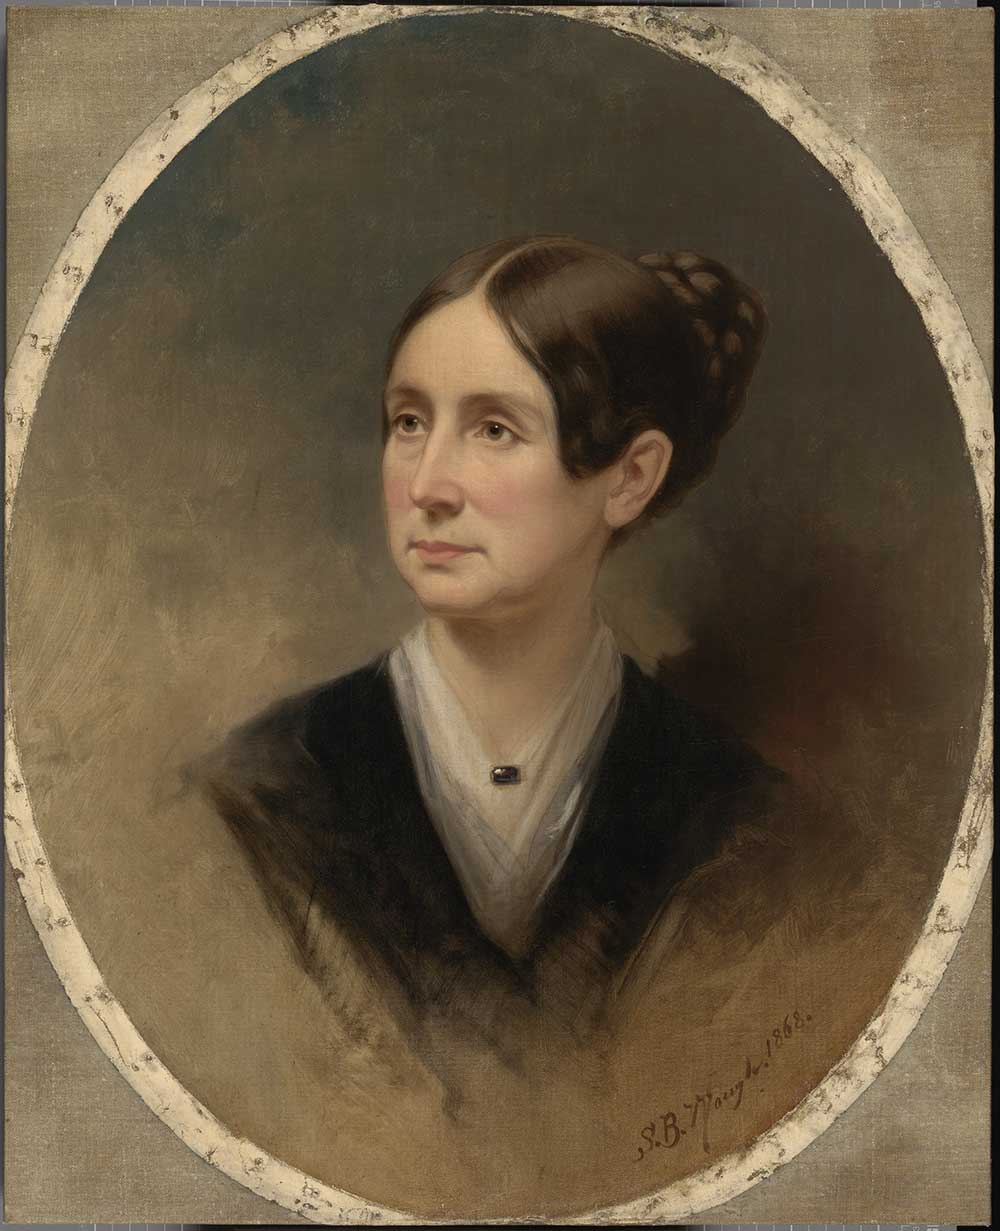 Painted portrait of Dorothea Dix in circular frame